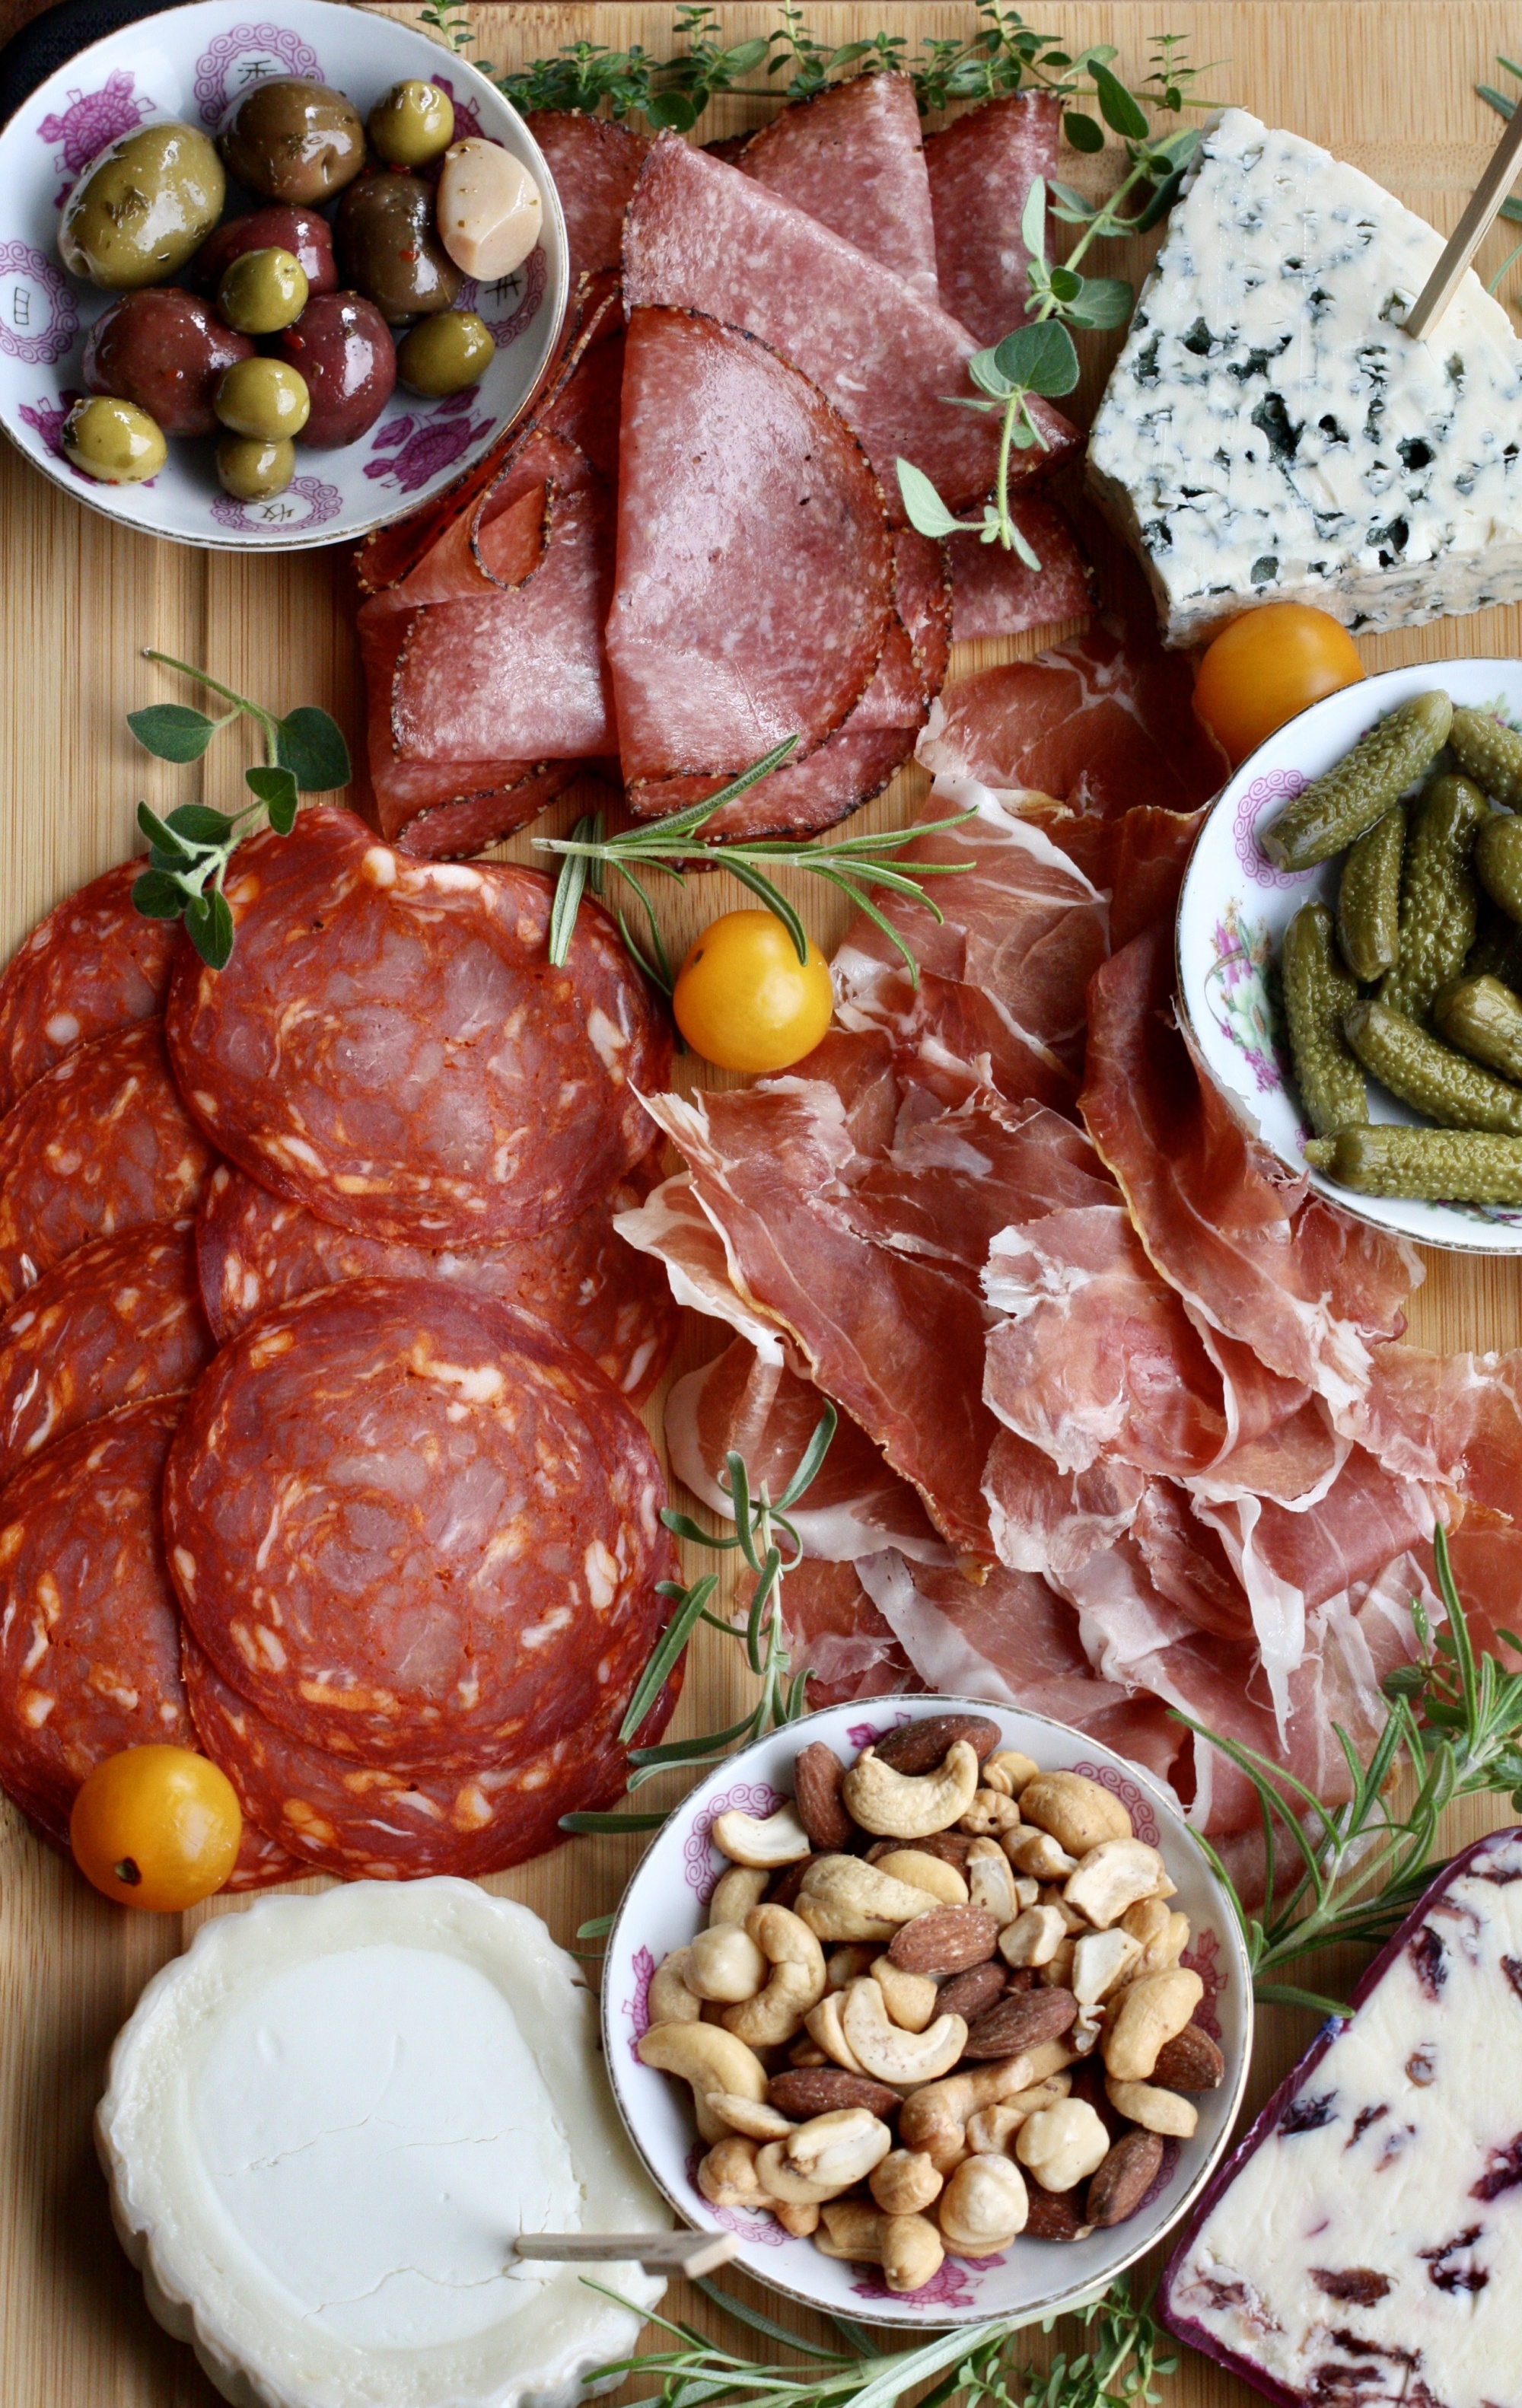 How To Make a Charcuterie Board That Will Wow Your Guests featuring a board full of cured meats, nuts and flavorful cheeses, herb garnishes, cheese board